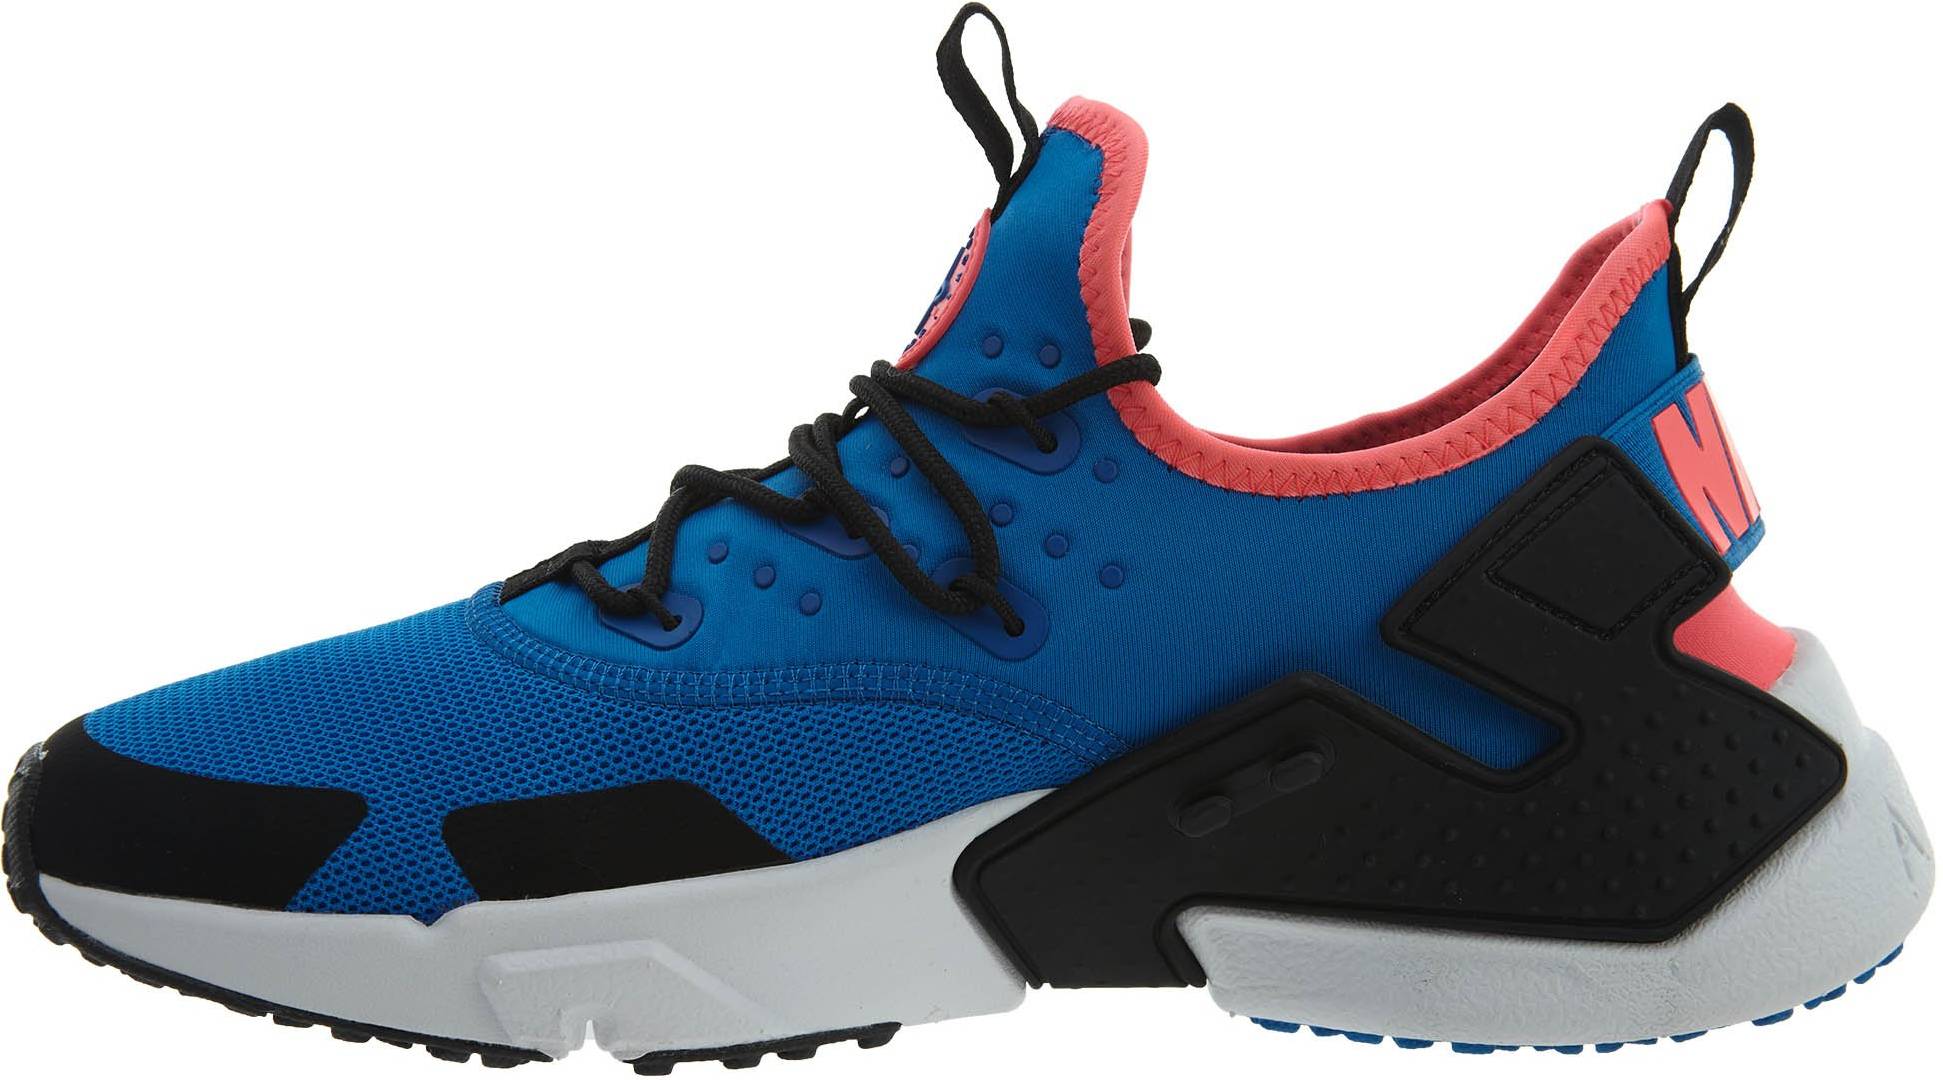 images of huarache shoes